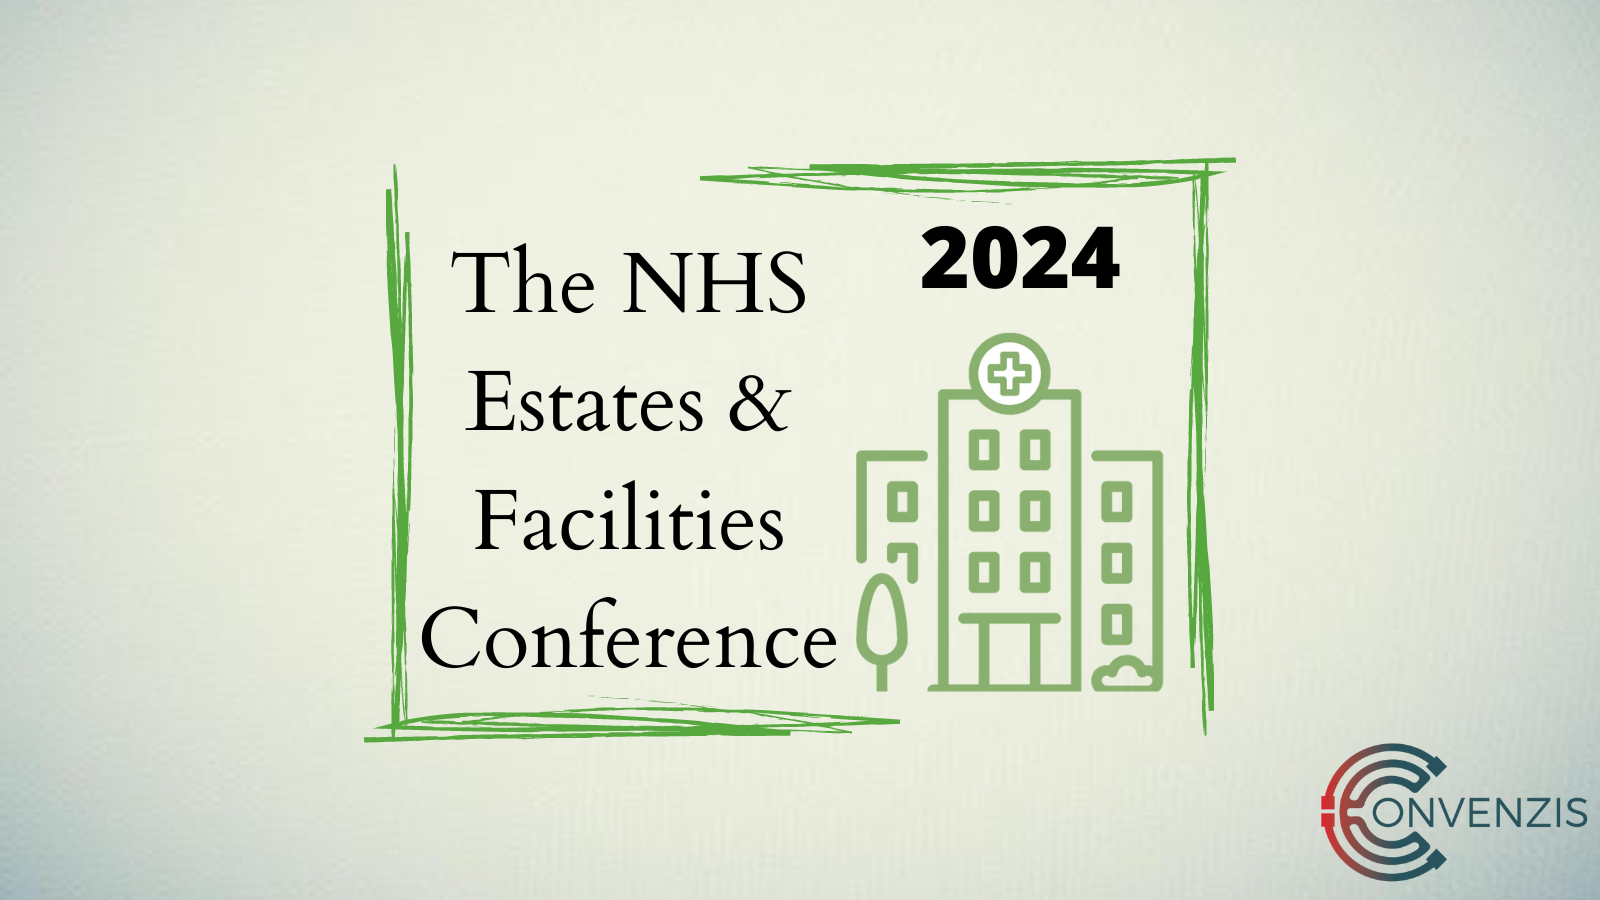 Convenzis Event The NHS Estates & Facilities Conference 2024